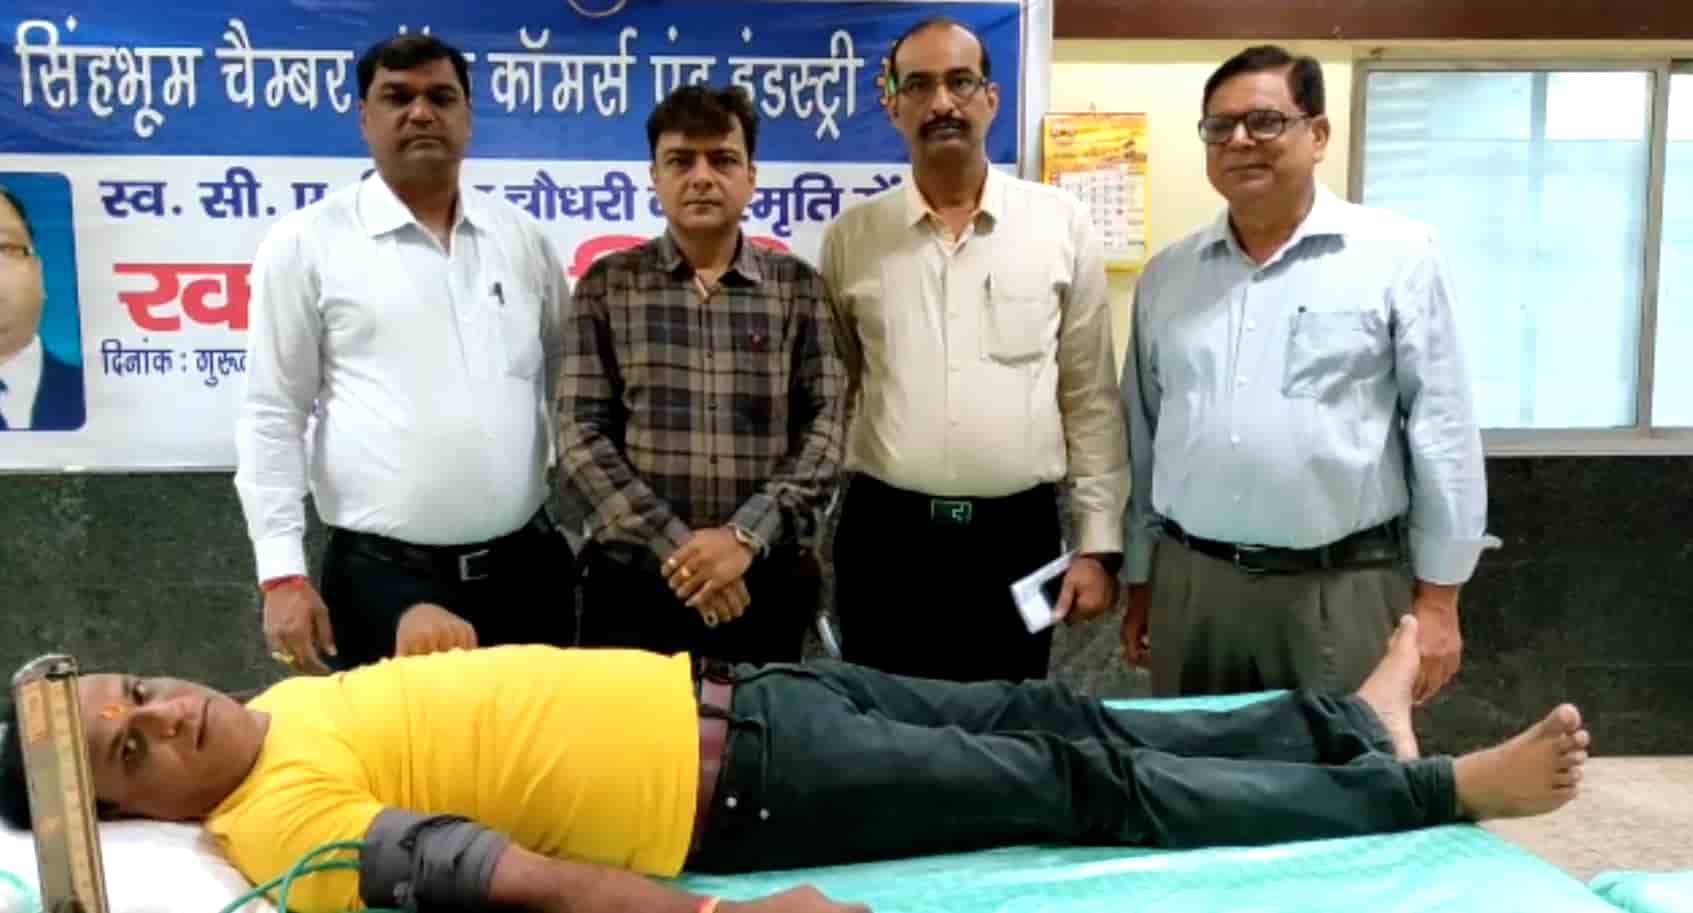 Blood donation in memory of Dinesh Choudhary